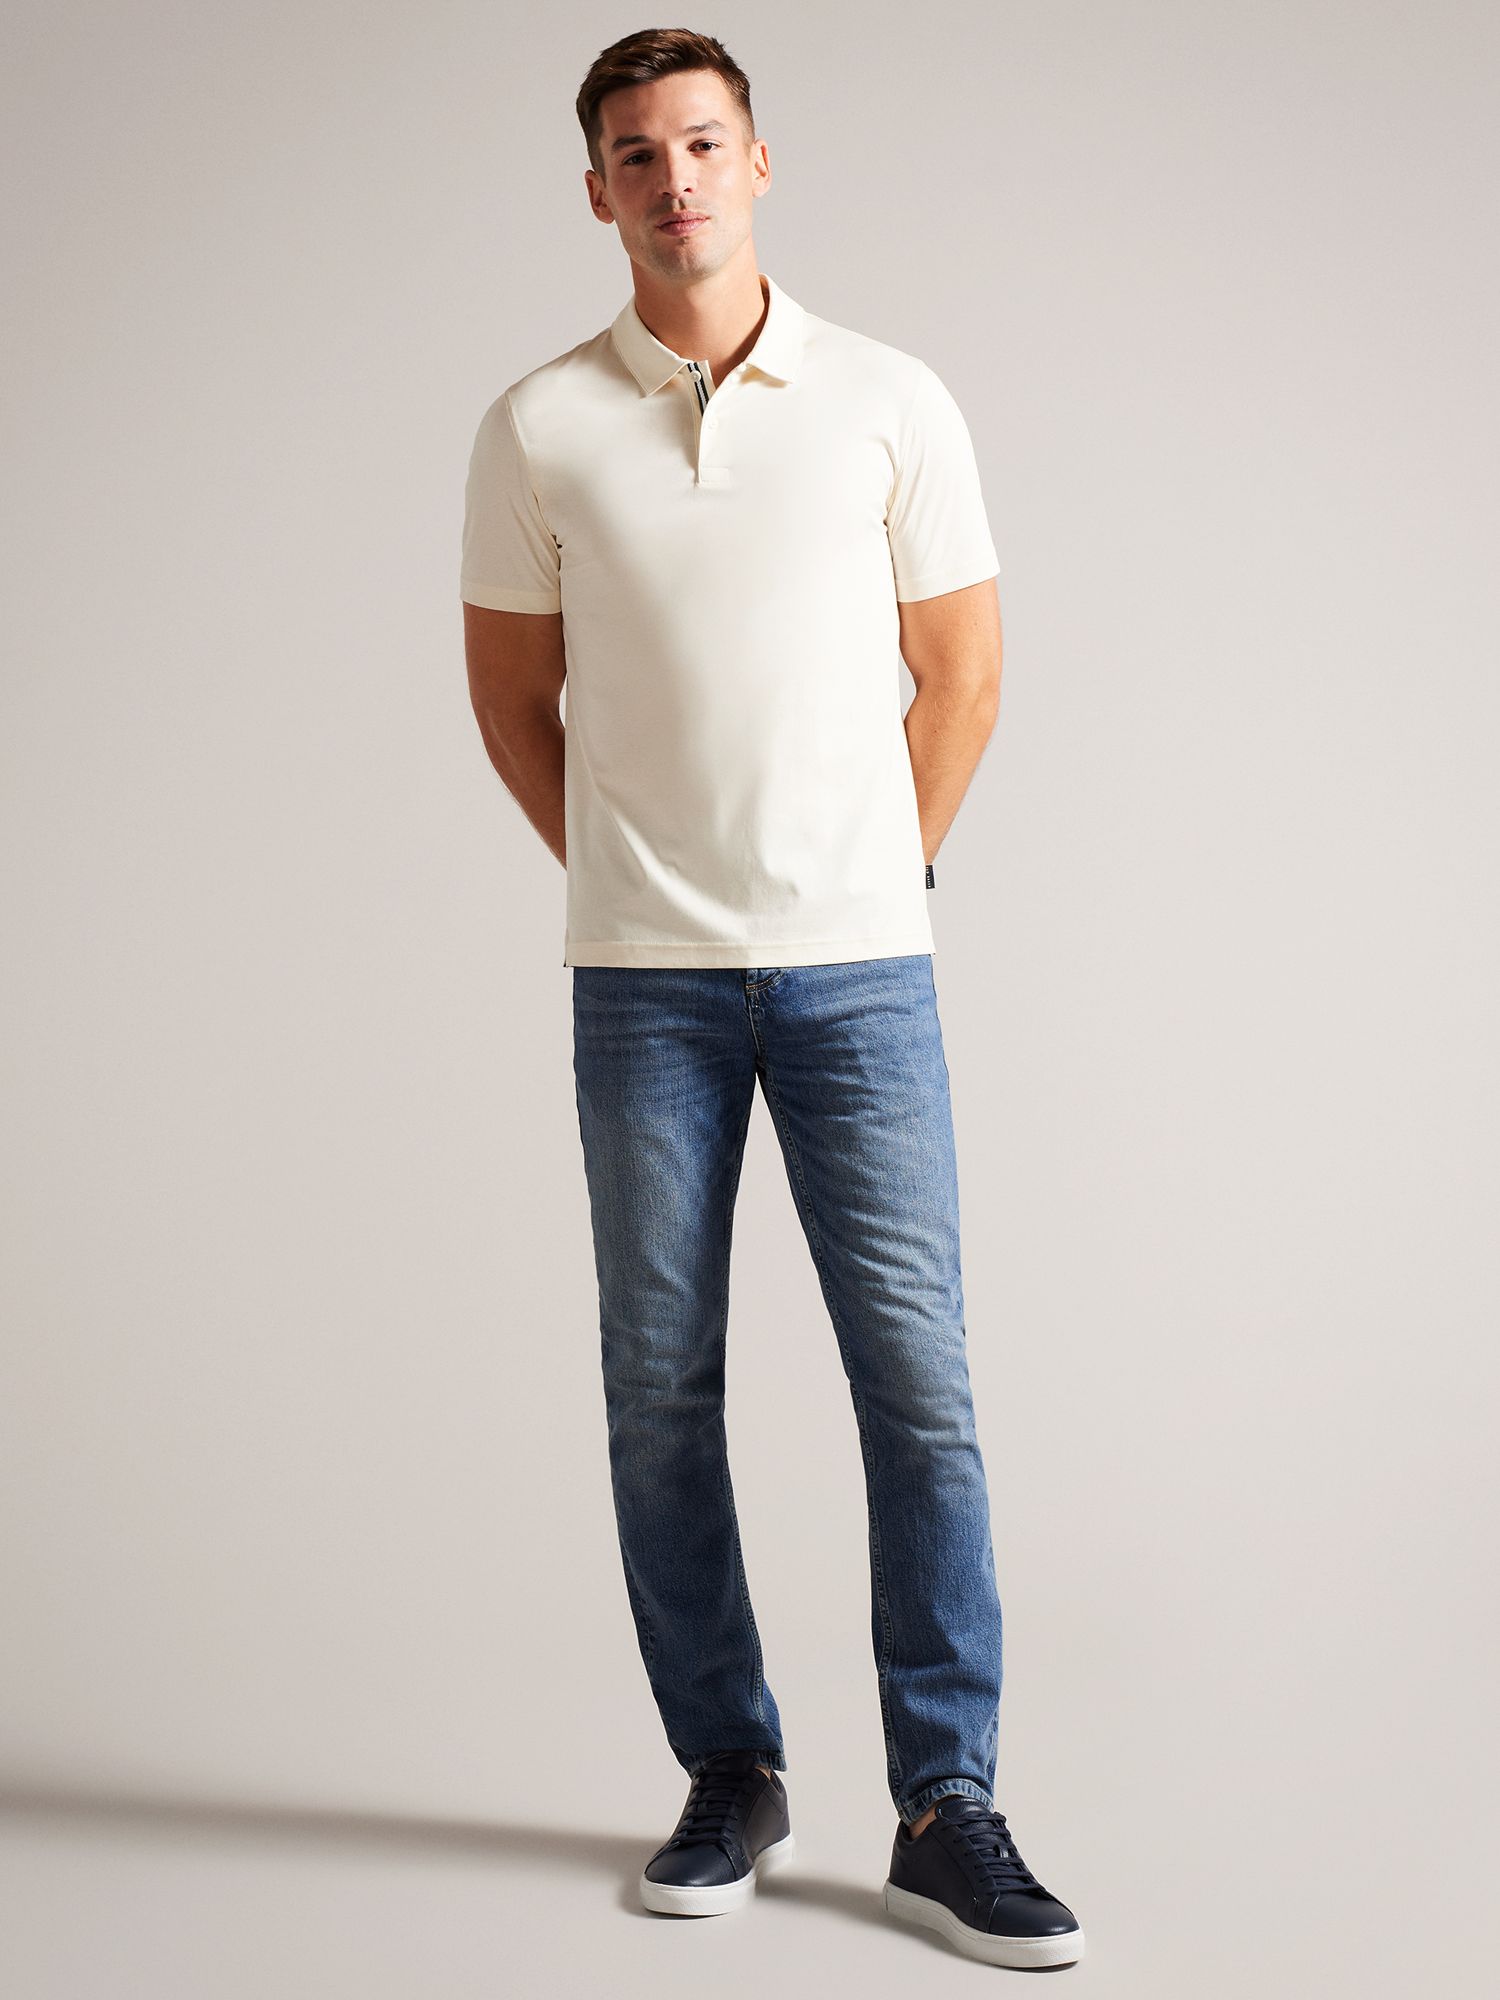 Ted Baker Joeyy Straight Fit Stretch Jeans, Blue Mid at John Lewis ...